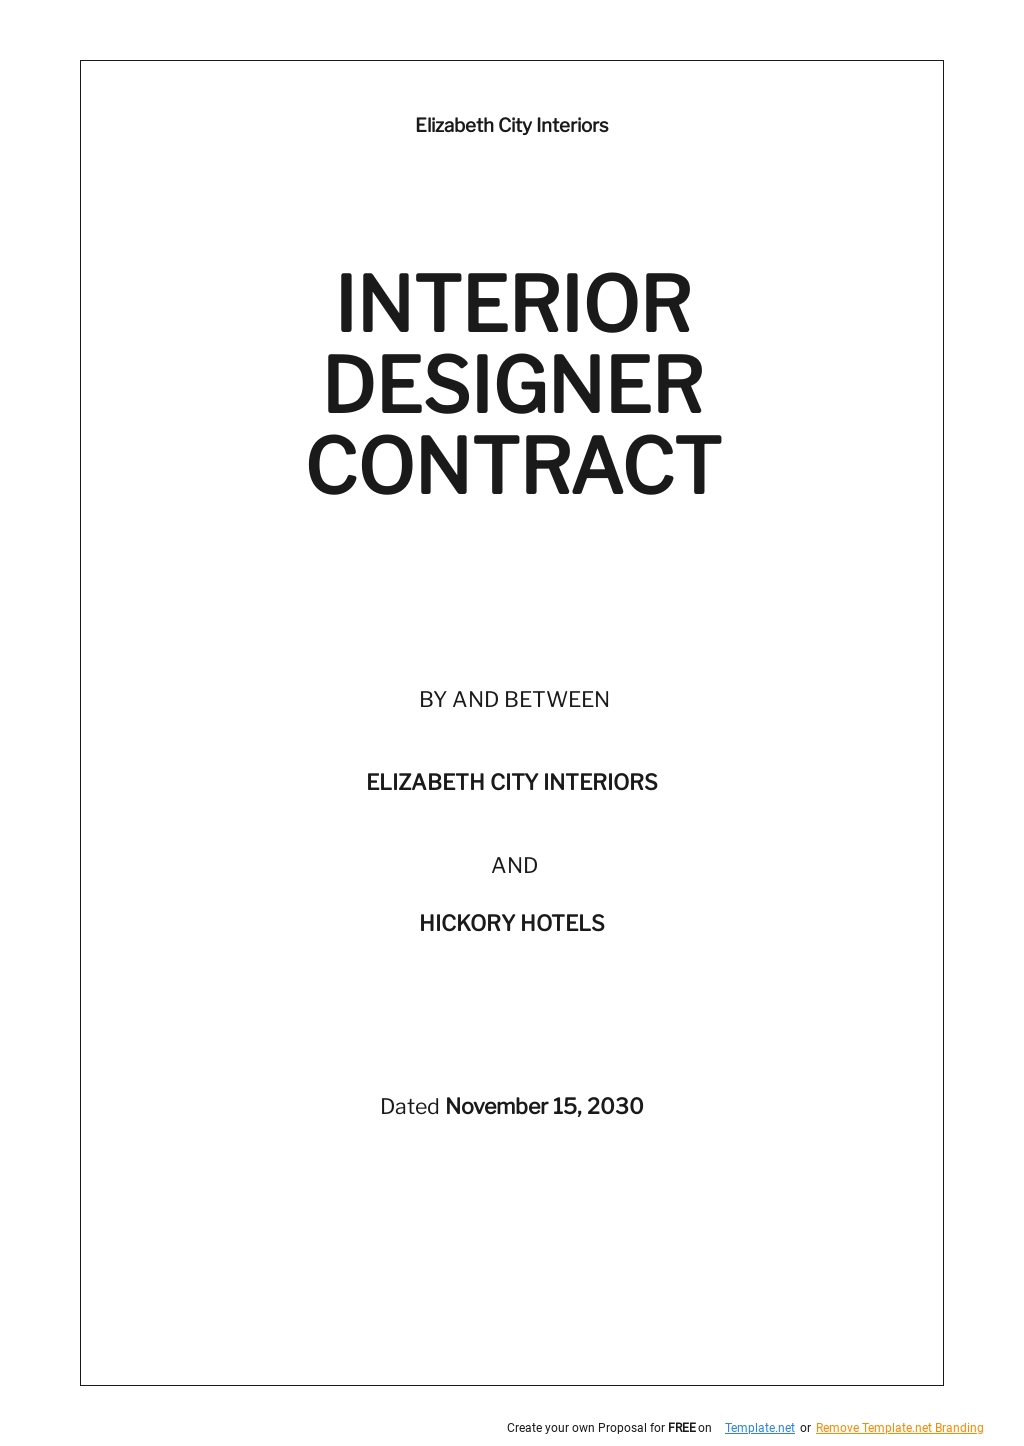 Contract Template For Interior Design Services